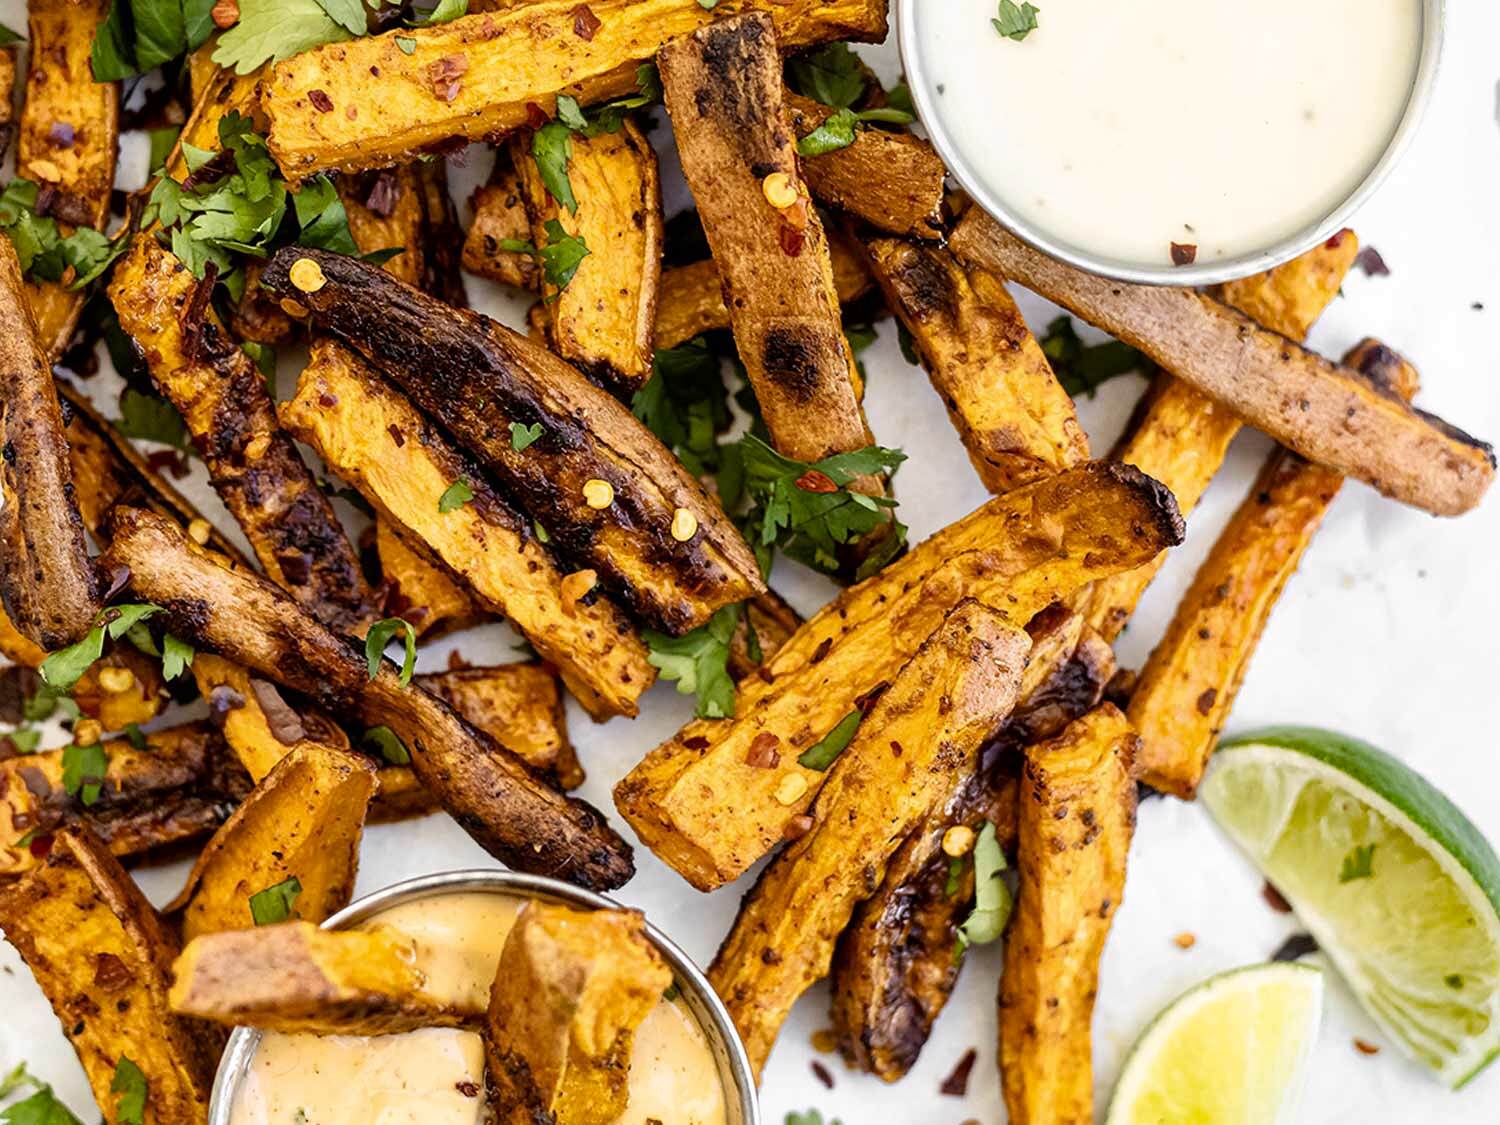 Chili Lime Sweet Potato Fries With Dipping Sauce Trio